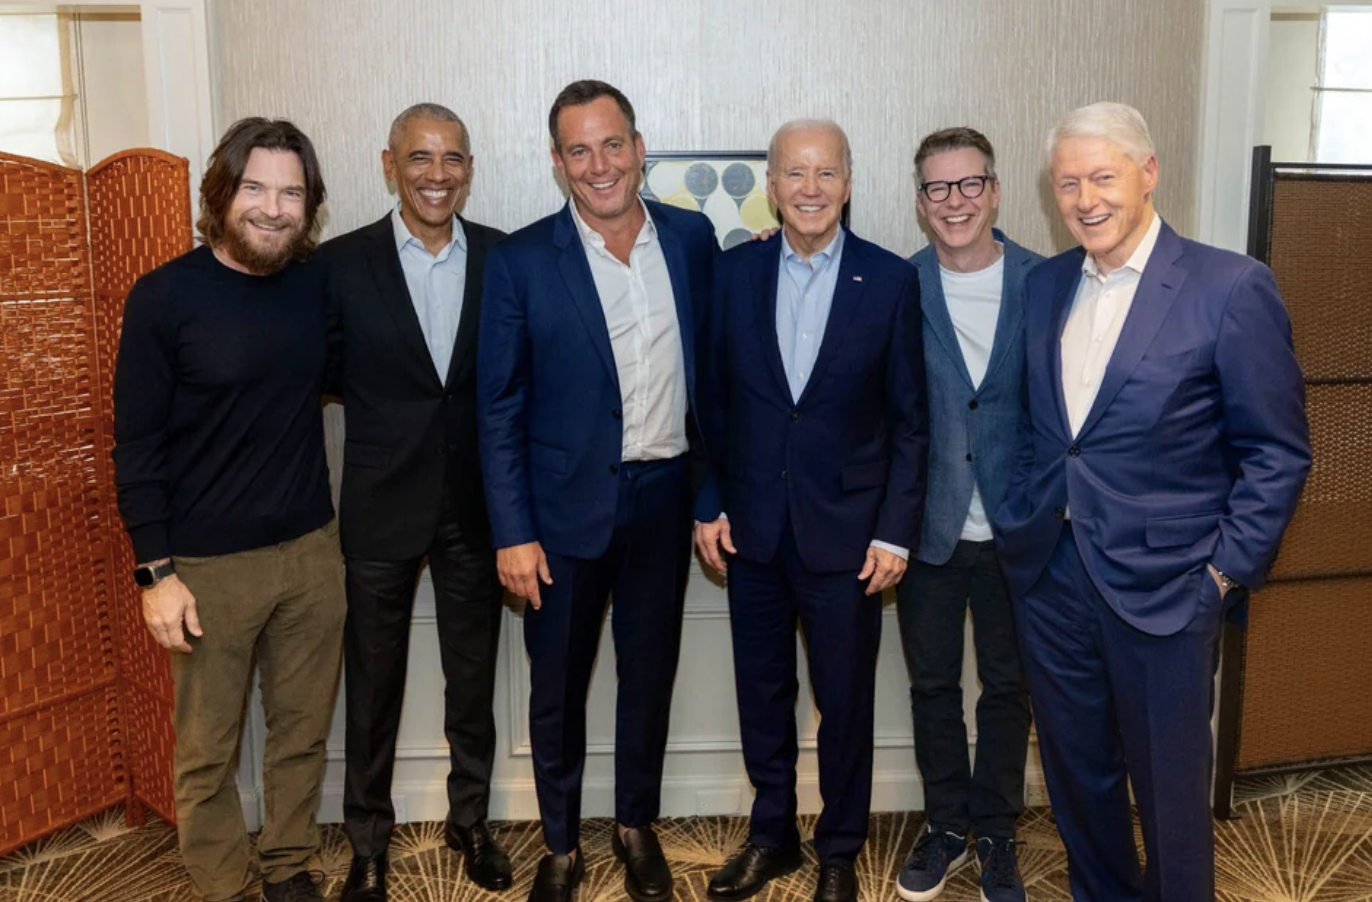 The Smartless guys with Presidents Obama, Biden, and Clinton.